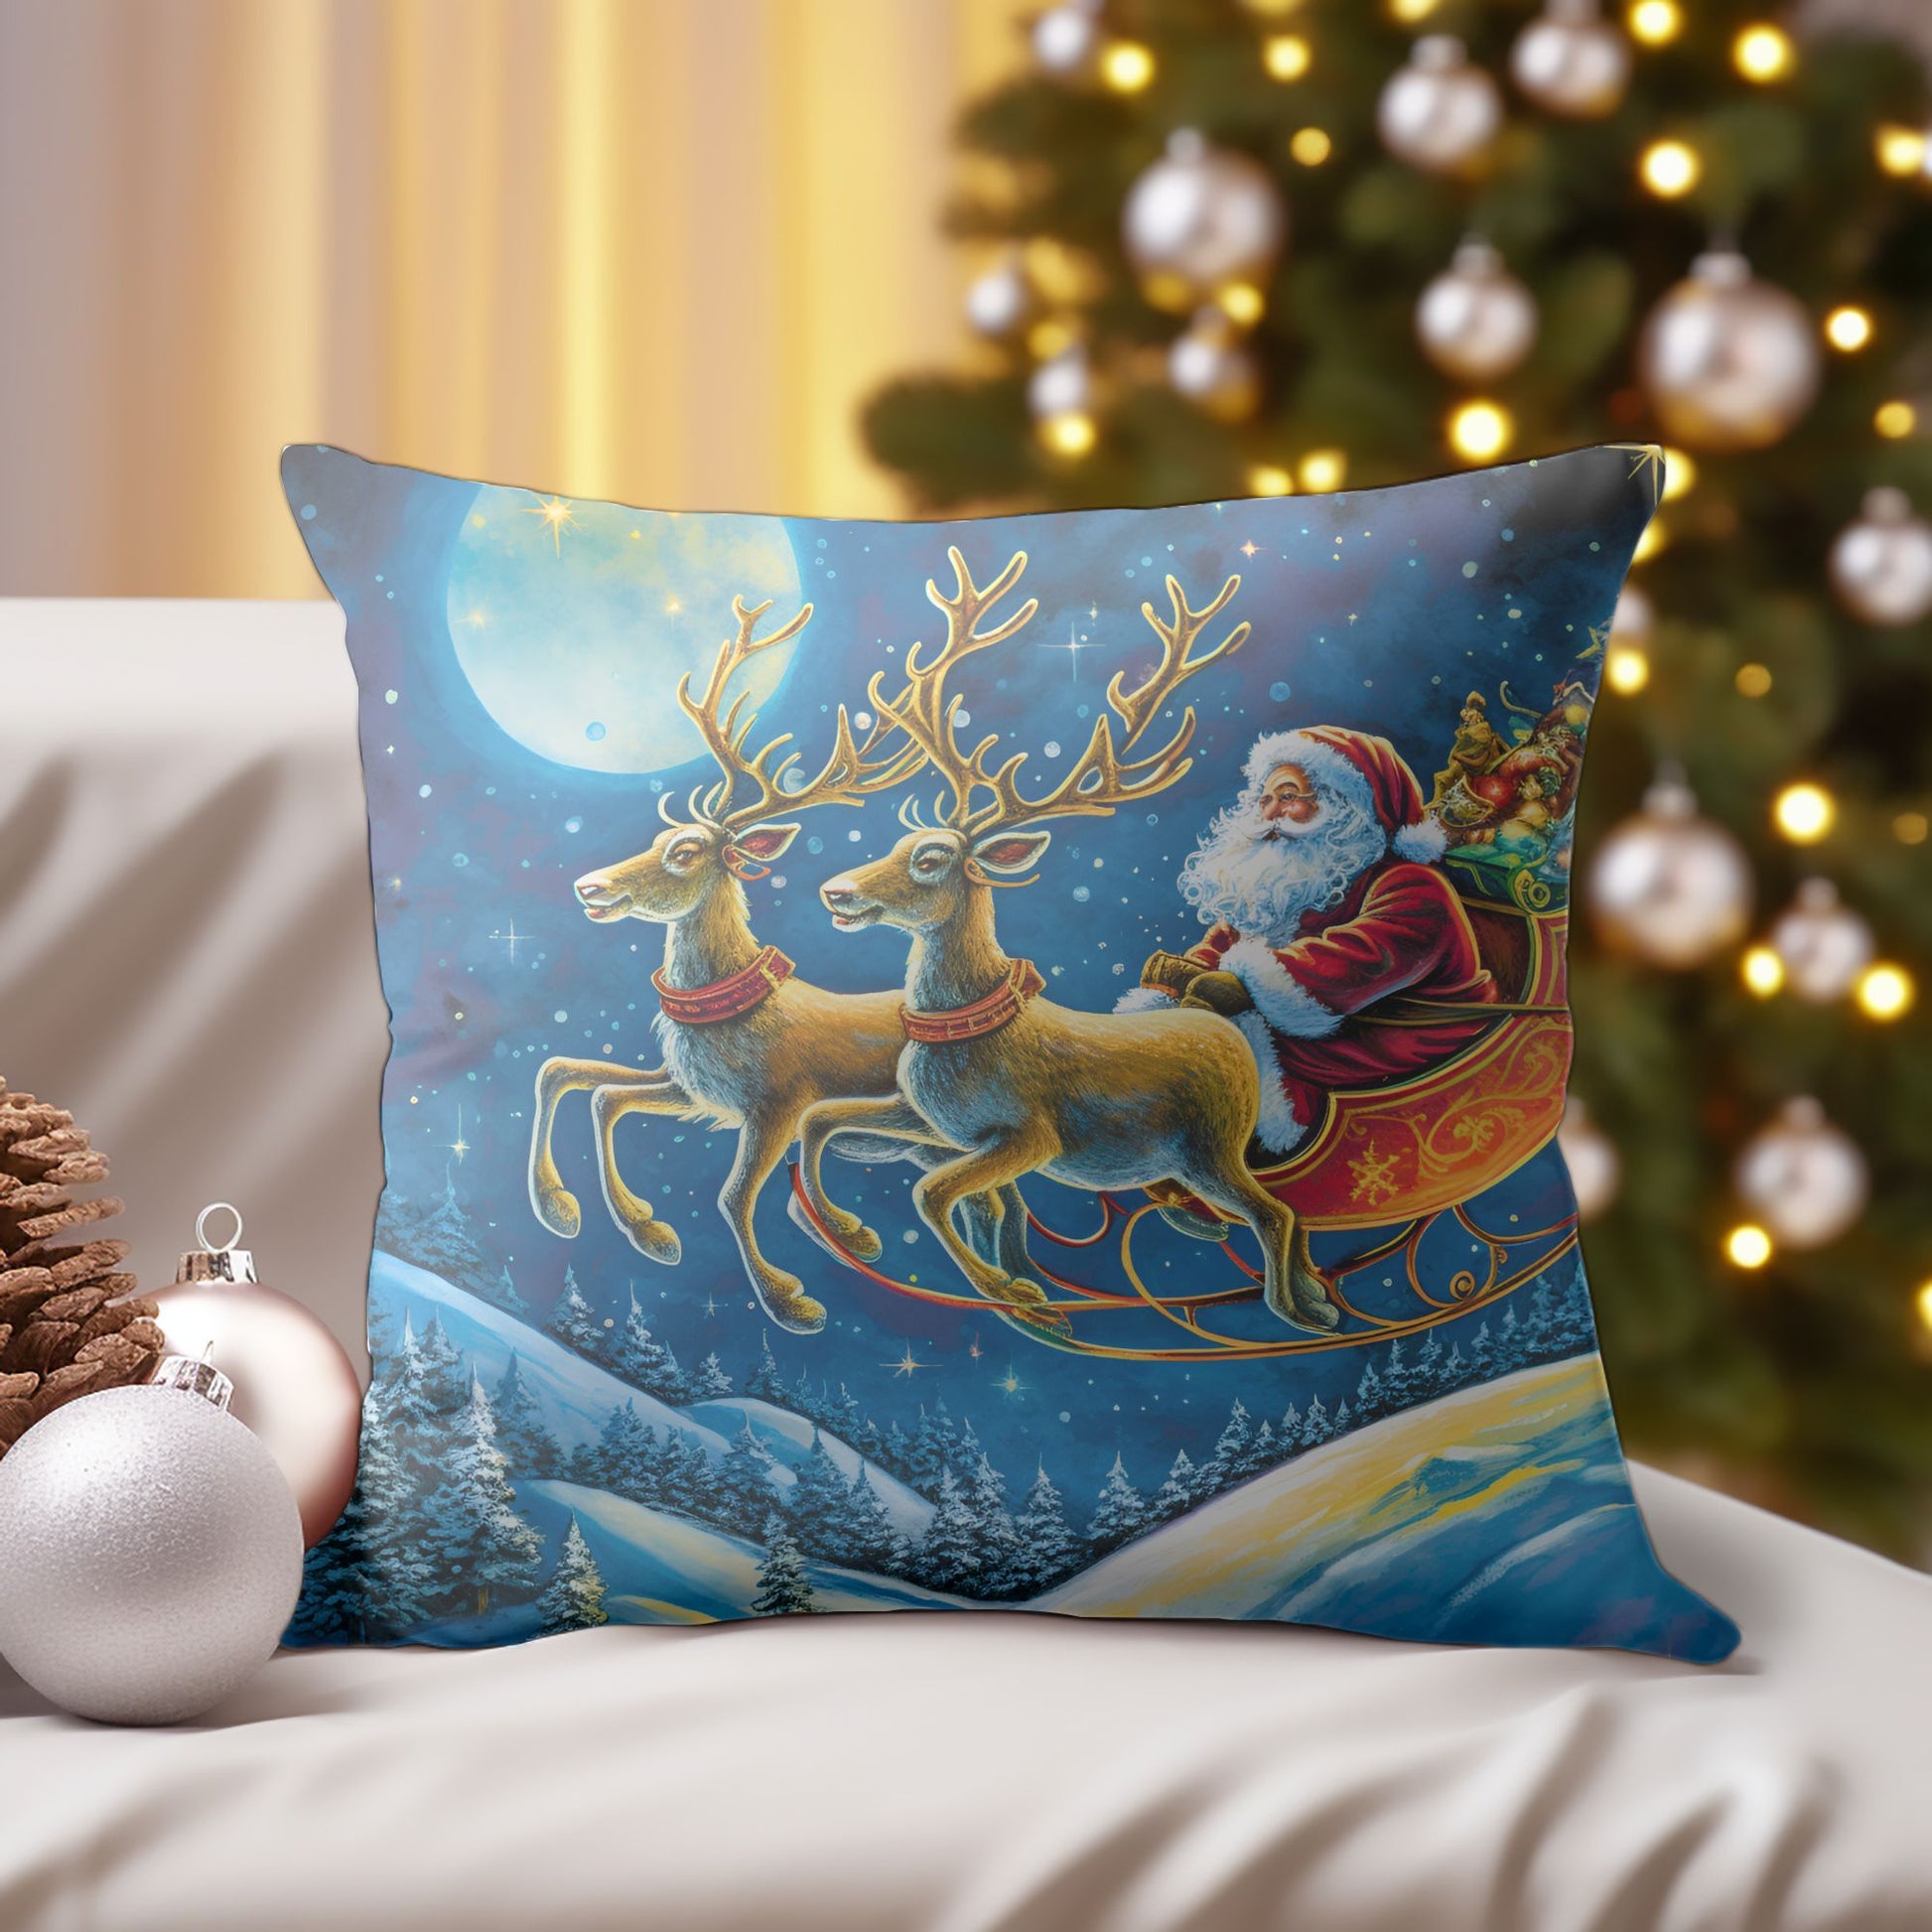 Holiday Decorative Pillow with Santa and Reindeer Design